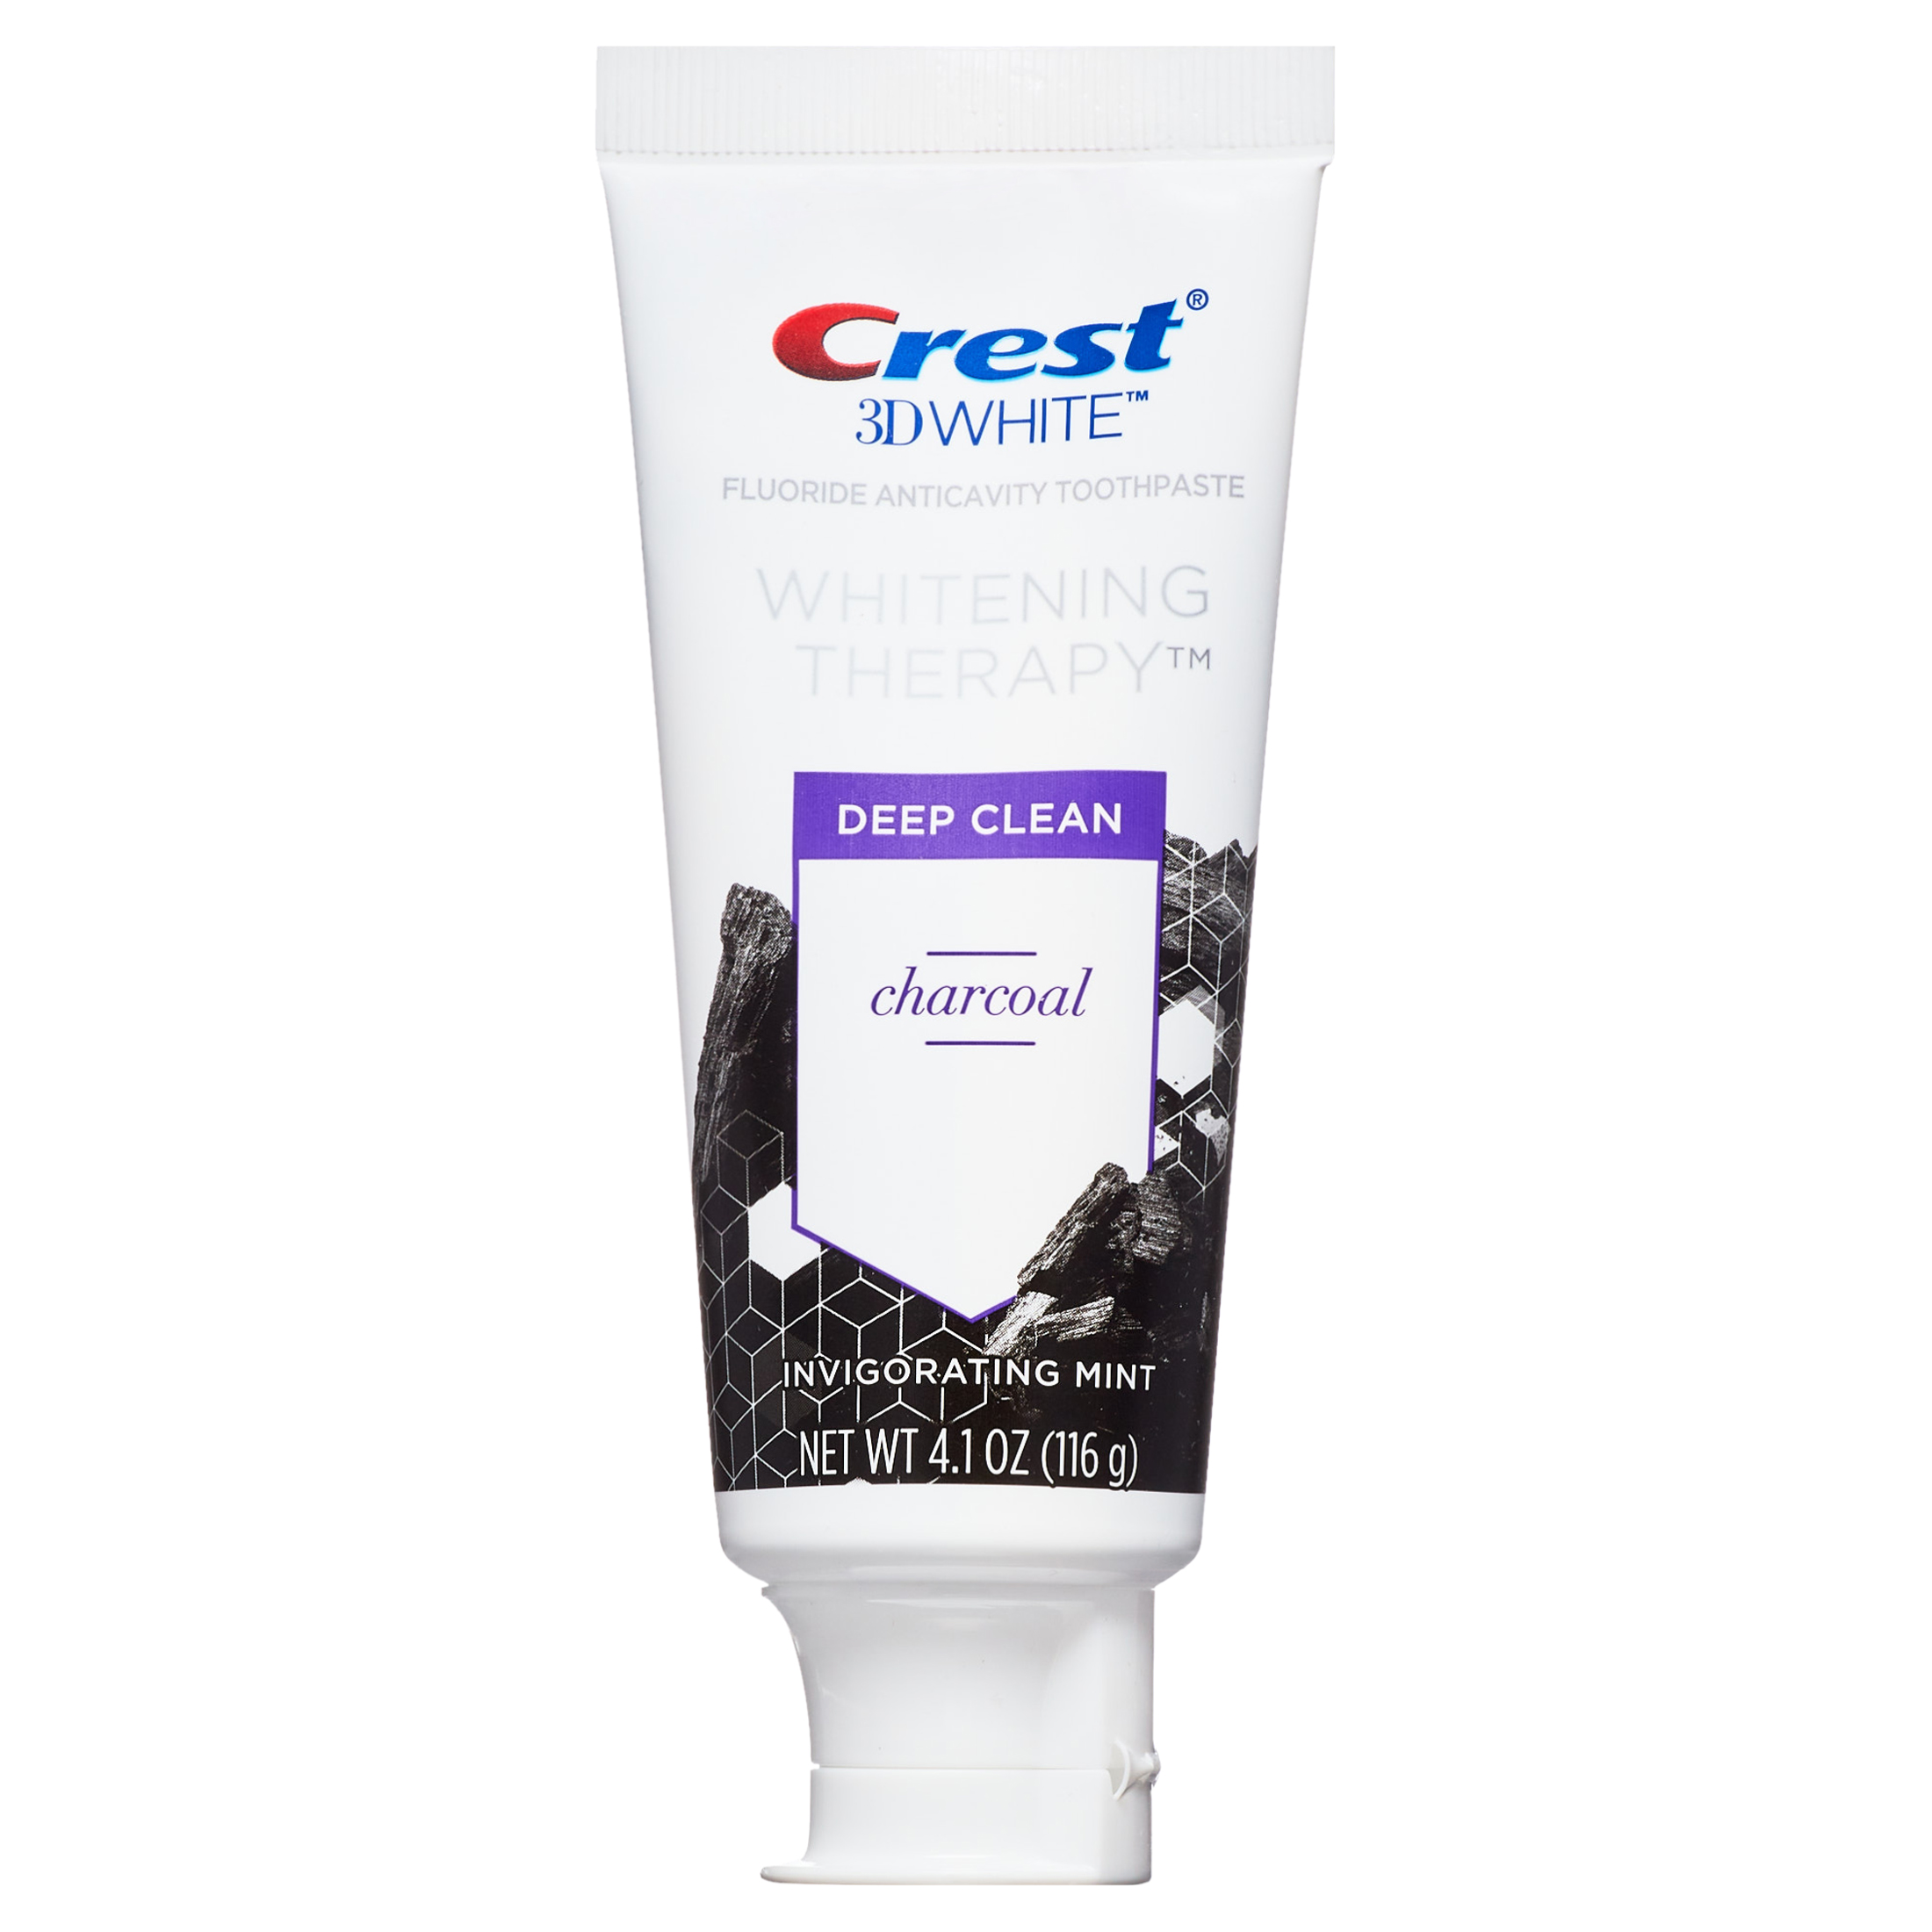 Crest 3D White Whitening Therapy Charcoal Deep Clean Toothpaste, Mint, 4.1 oz - image 3 of 11